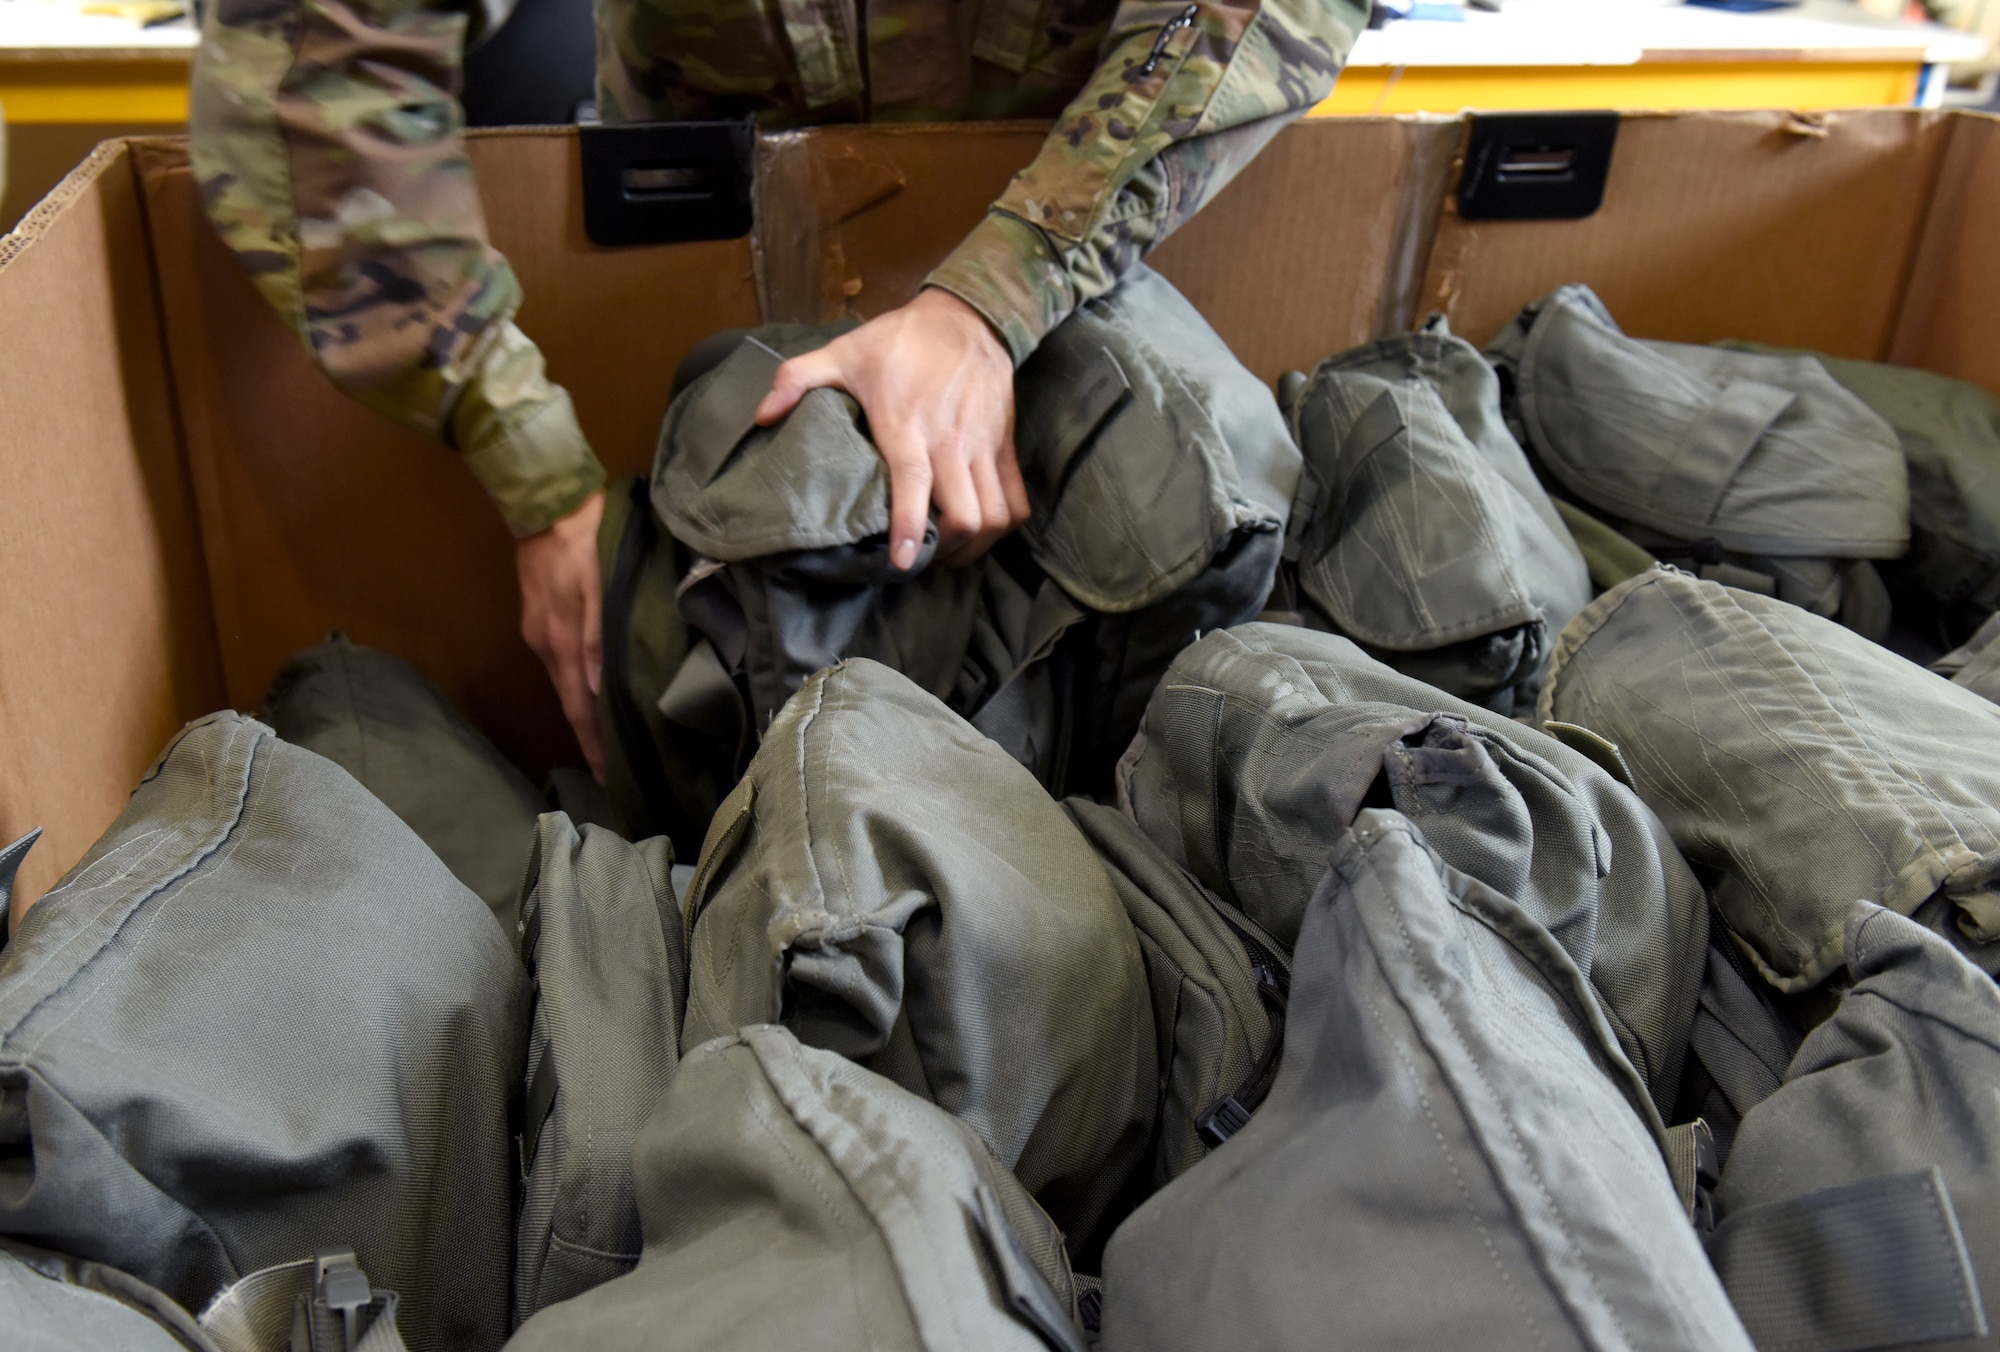 U.S. Air Force Airman 1st Class Kendrew Olboc, 100th Logistics Readiness Squadron Individual Protective Equipment apprentice, stacks old, turned-in gas masks ready to be shipped back to depot in the States at Royal Air Force Mildenhall, England, March 15, 2022. Airmen in the IPE shop support geographically separated units including RAF Croughton, and Stavanger, Norway, and issue all gear for chemical warfare assets to members tasked for deployments and TDYs, ensuring they are issued the correct equipment. (U.S. Air Force photo by Karen Abeyasekere)